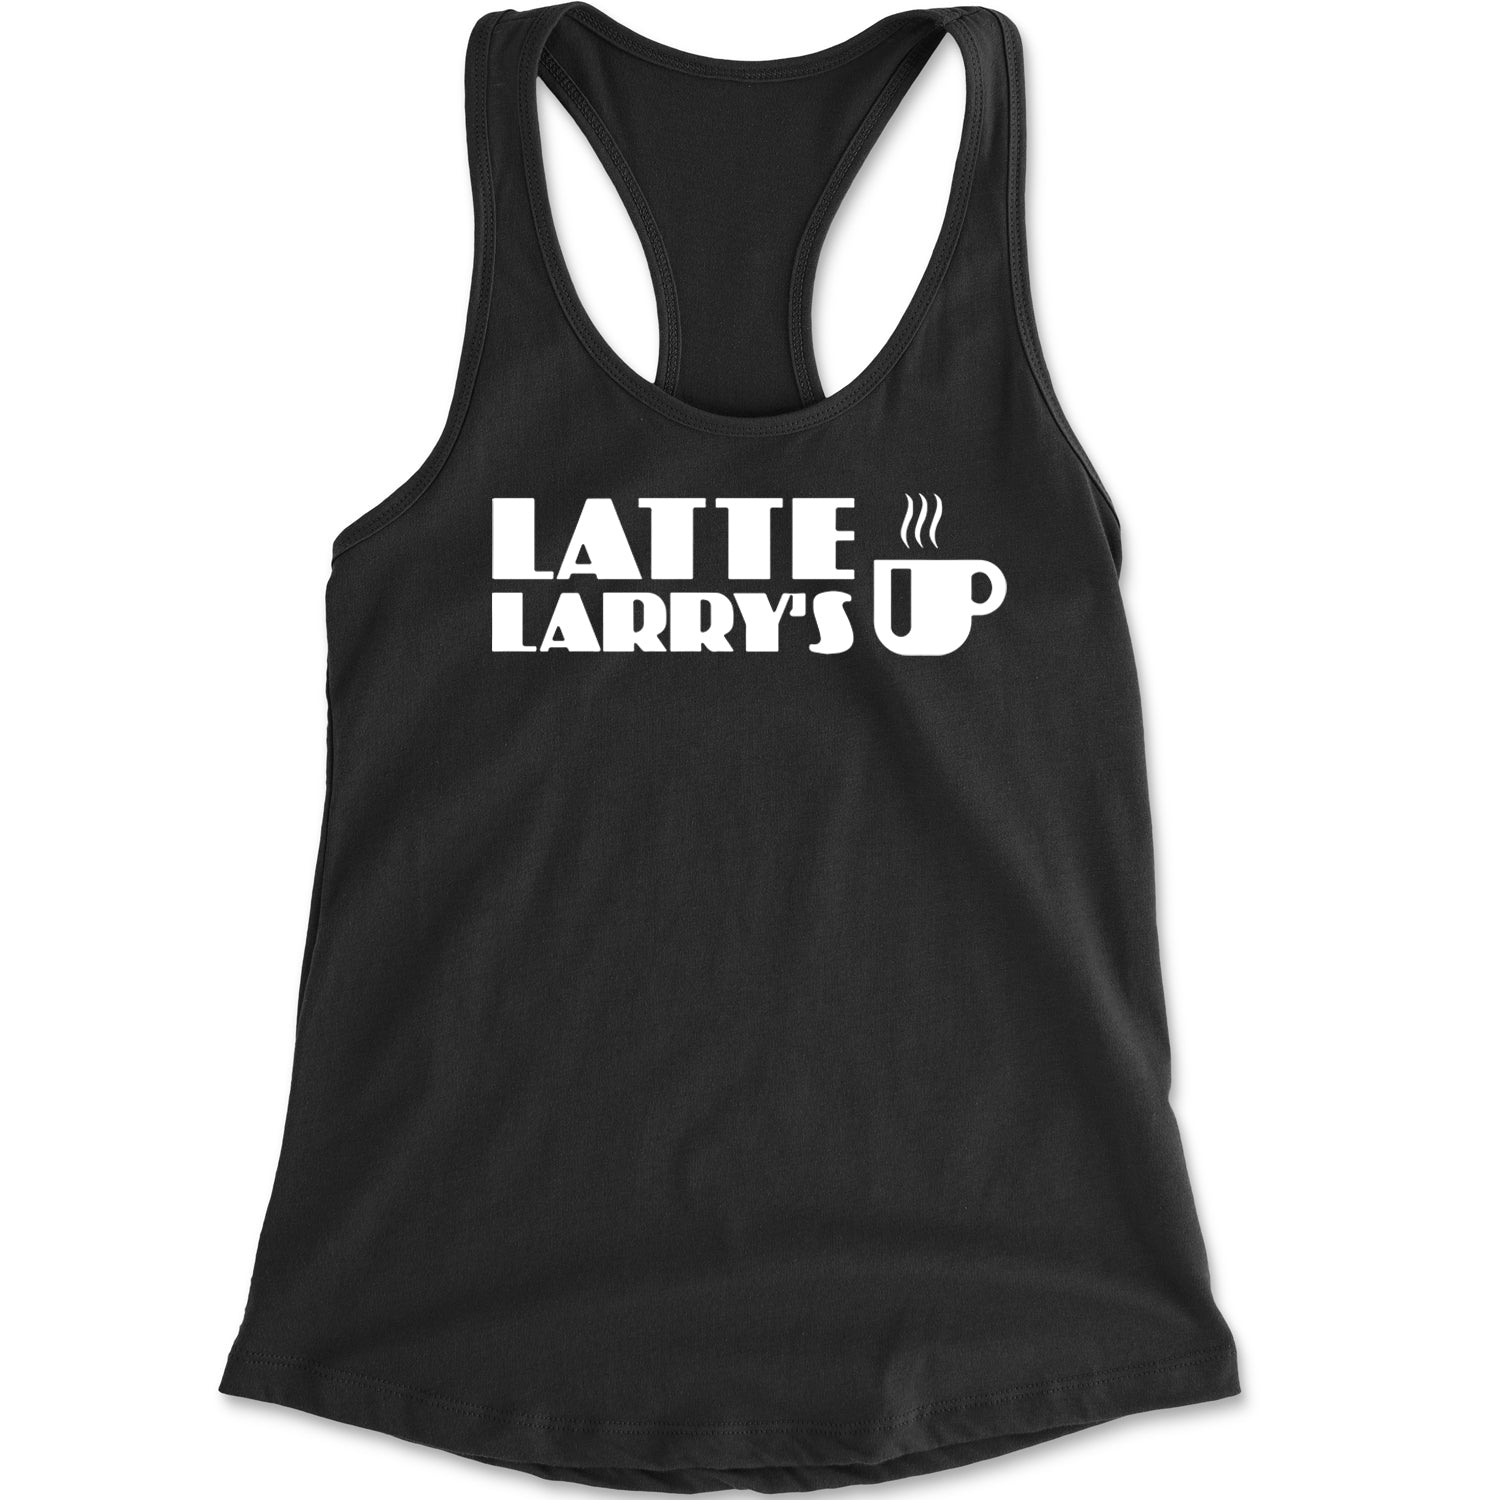 Latte Larry's Enthusiastic Coffee Racerback Tank Top for Women